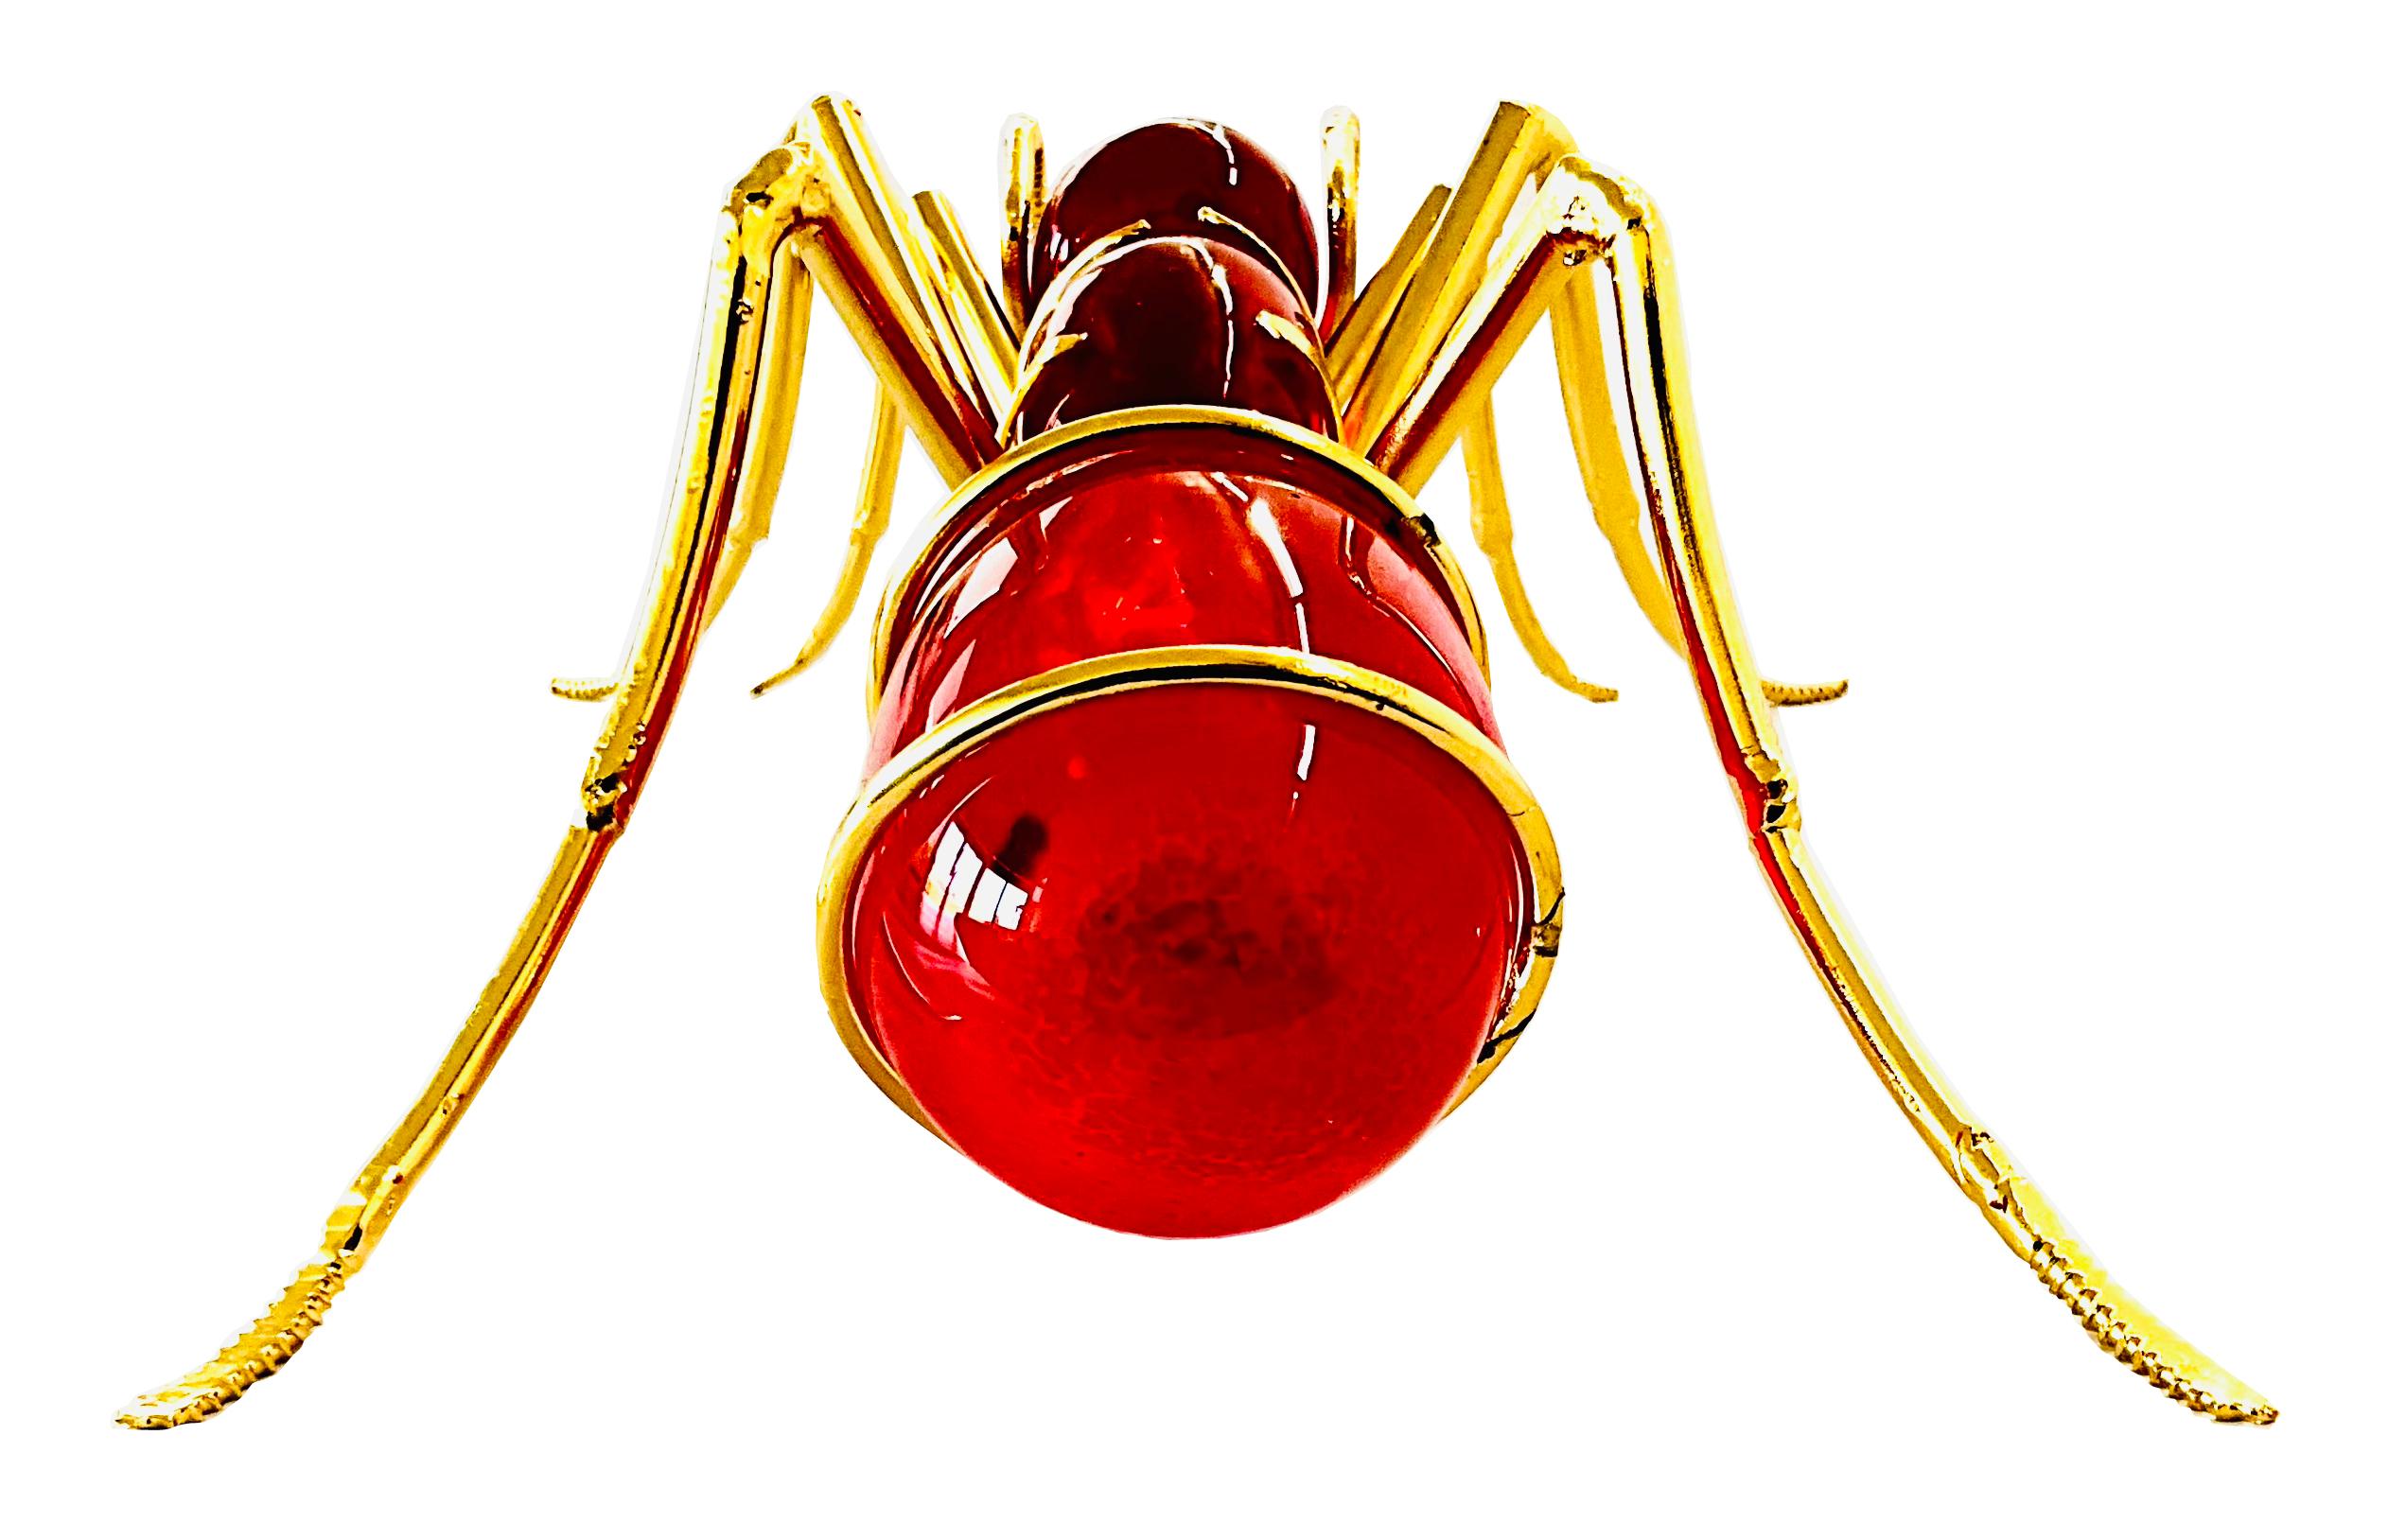 Hand-Blown Glass Ant Gold Plated Recycled Industrial Iron and Red Crystal Parts  - White Figurative Sculpture by Marcos Romero Gallardo